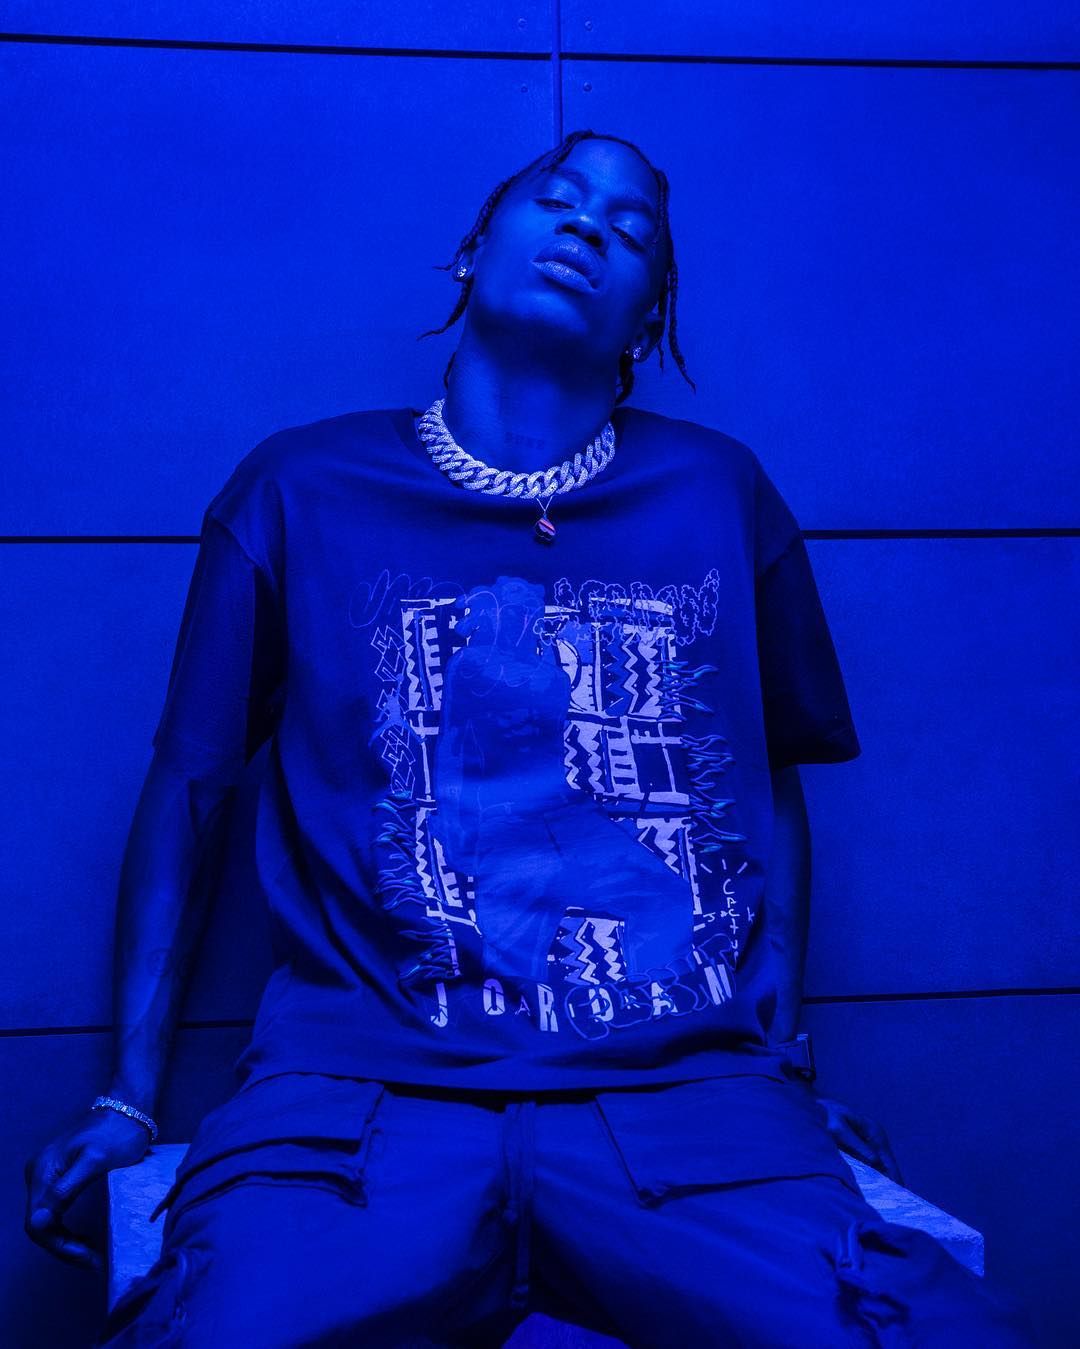 2m Likes, 11k Comments on Instagram: “Can't wait 2 rage tonight let's get Wila. Travis scott outfits, Travis scott, Travis scott wallpaper